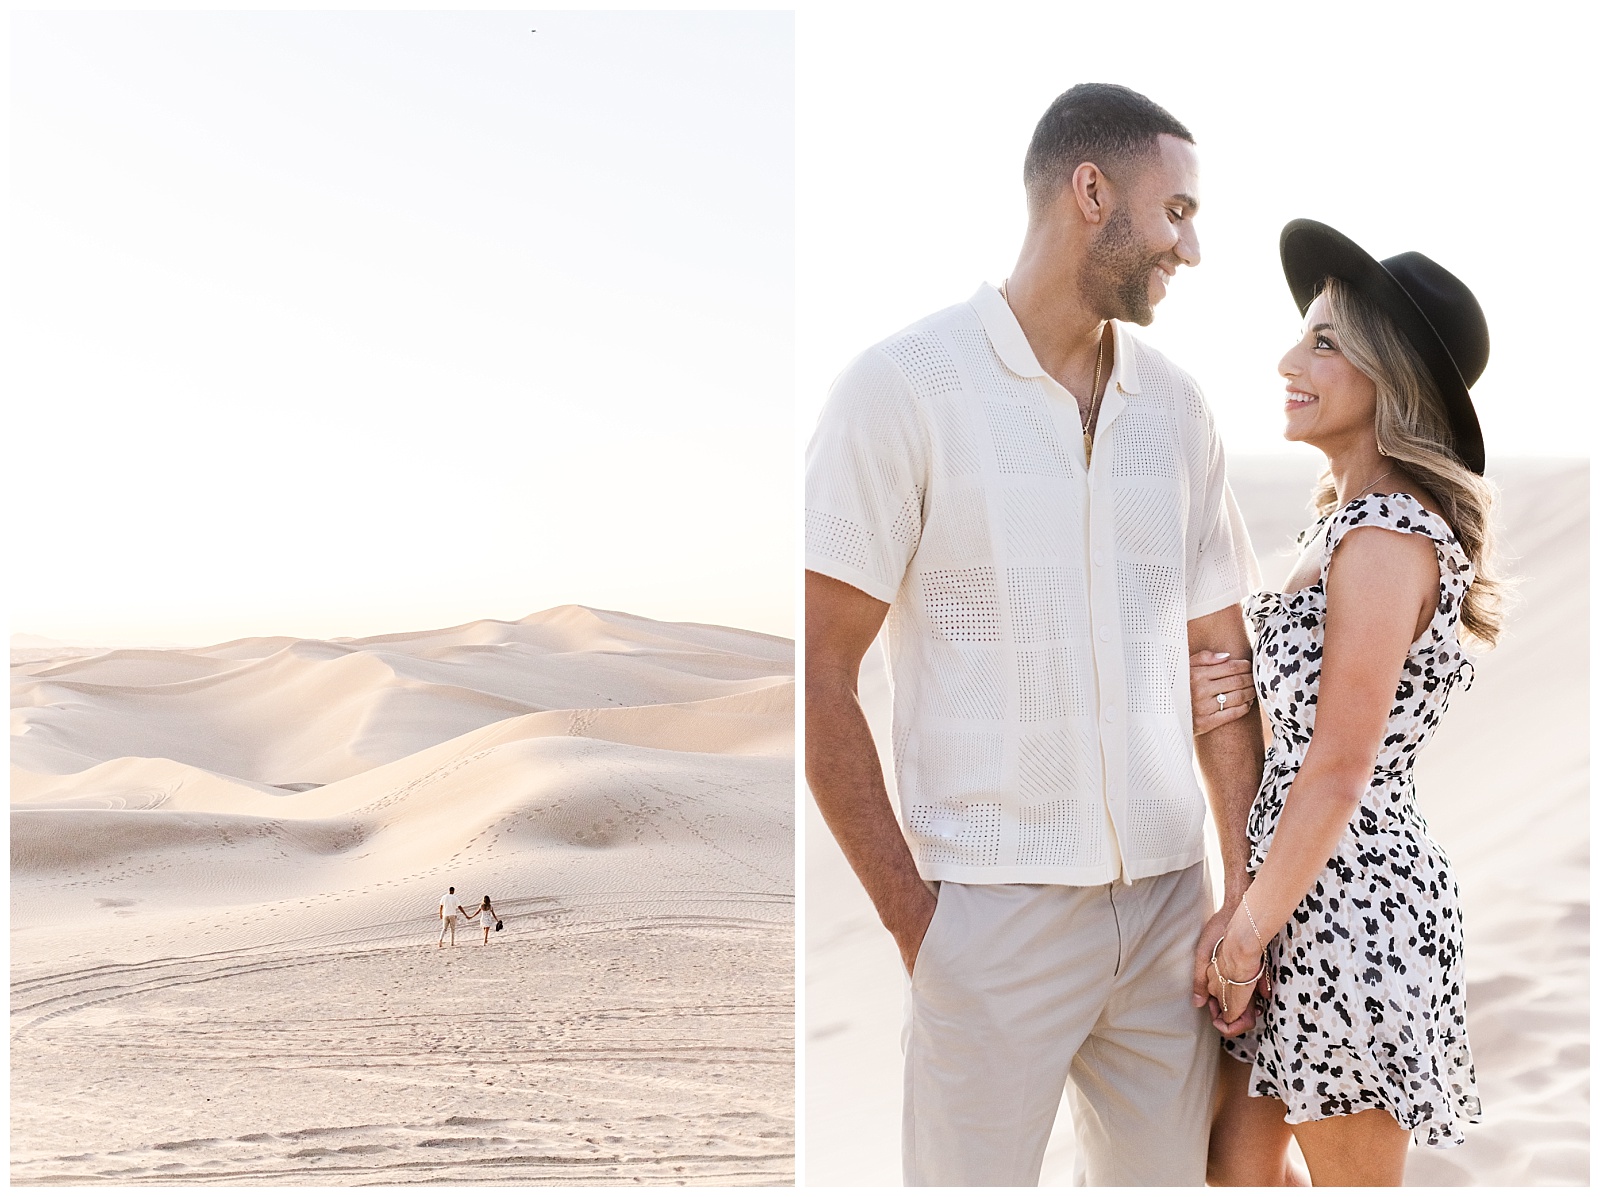 Two Image of Couple at Glamis Sand Dunes.